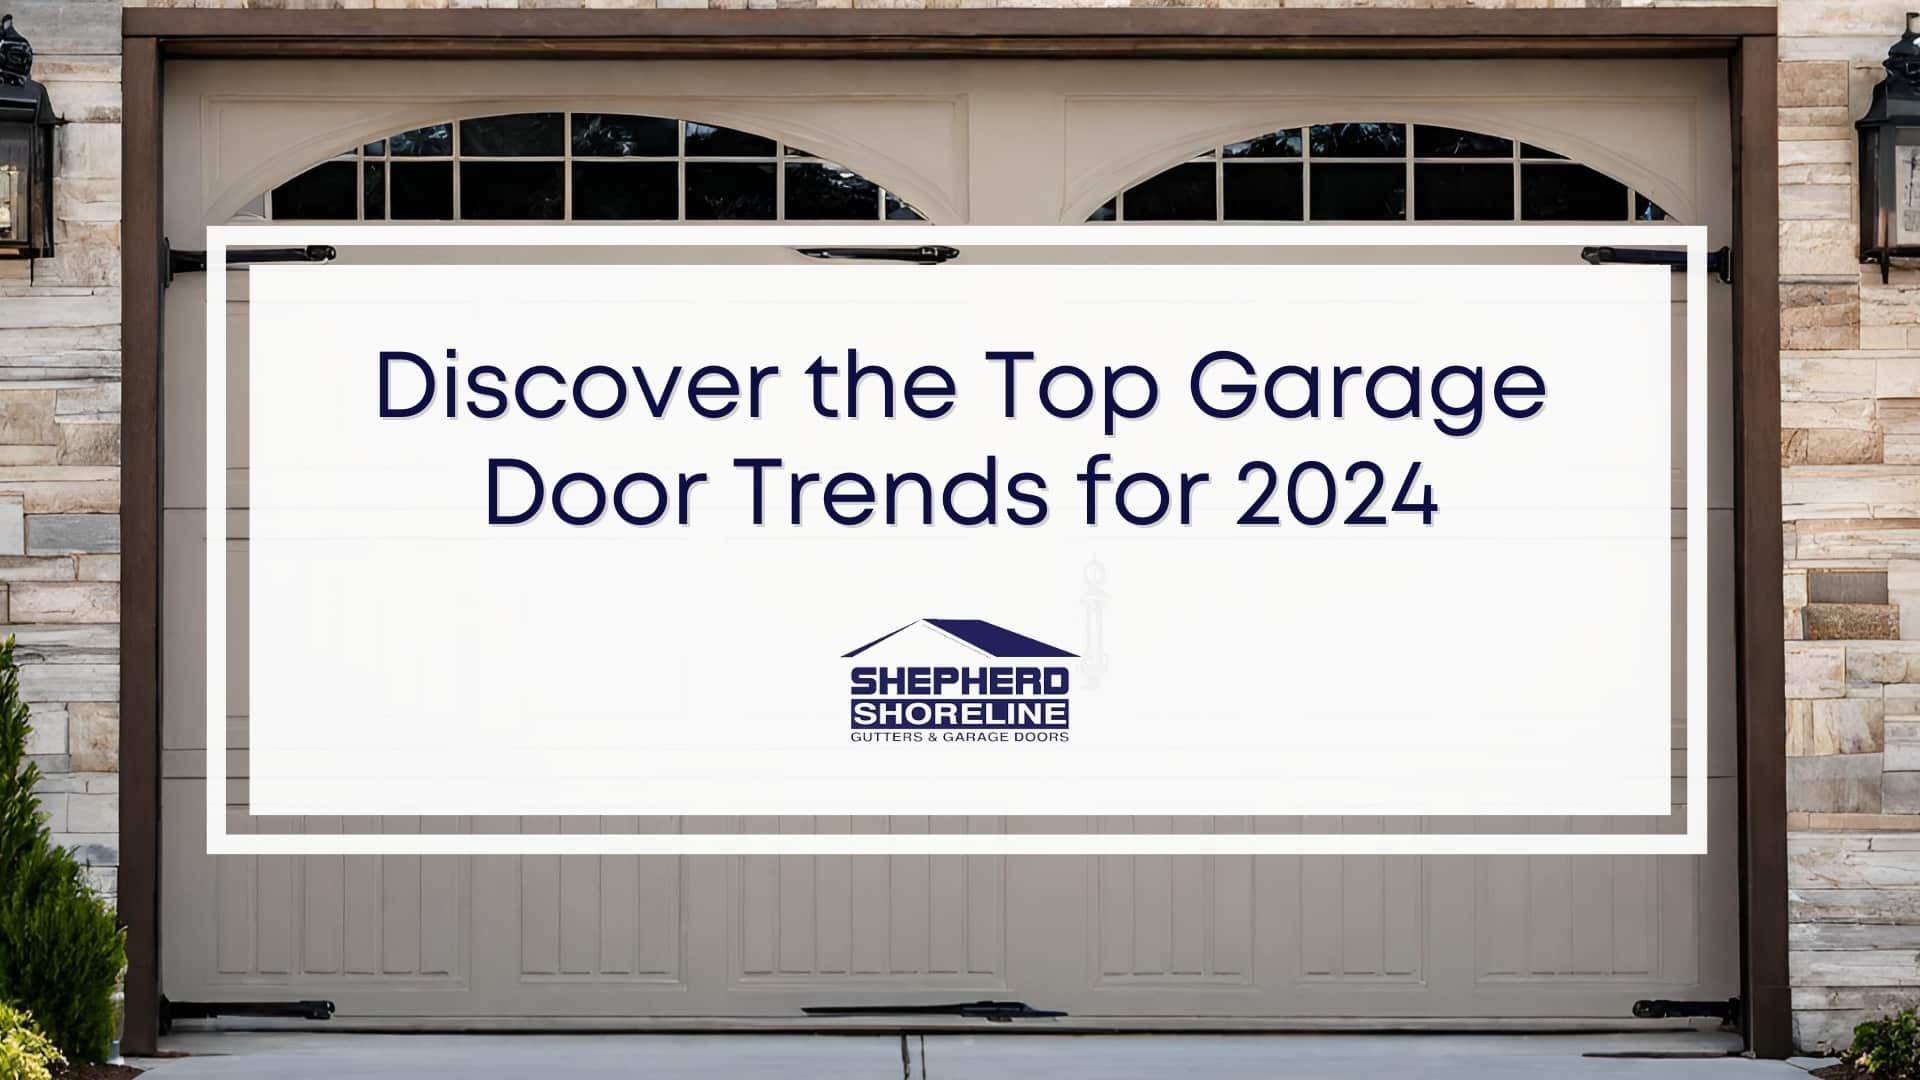 Featured image of discover the top garage door trends for 2024